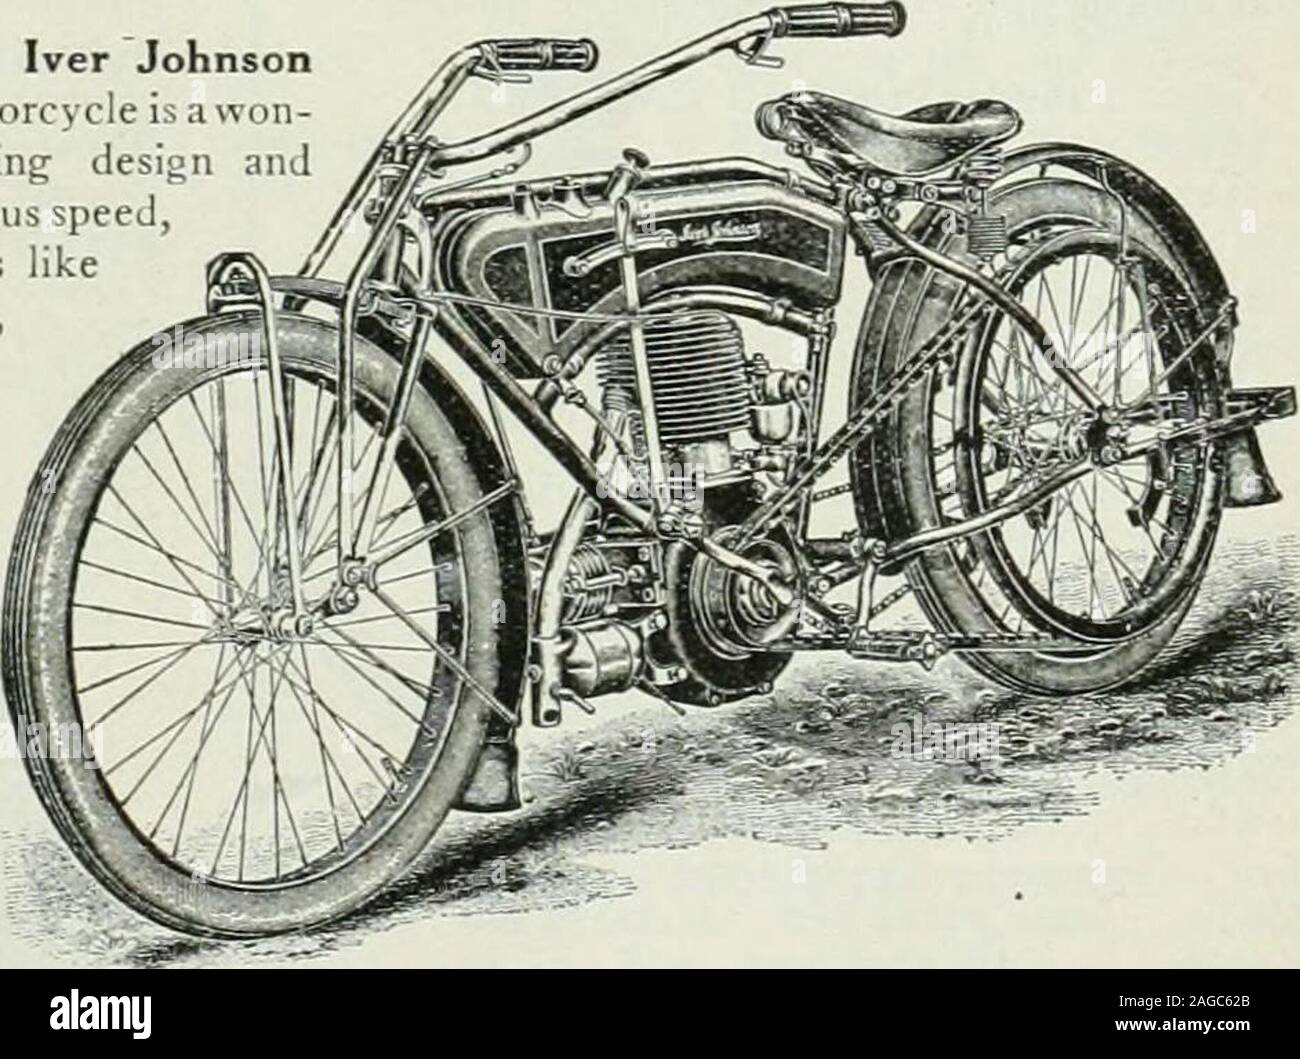 . Rod and gun. ^KQ ^^ Iver Johnson cannot be acciilent.illy clisrliarged. It has a lull eqiiipnieiit of unbreakable, permanent tension wire springs. The action is smooth and rapid. It is accurate and hard hitting. Catalog A. AL.^a. /^iinc ^^^ Iver Johnson Champion single barrel shot guns have a world-widereputation. Barrel and lug are drop forged from a single bar of steel.Coil springs wherever possible. All gauges up to 44 calibre. Catalog A. HiOV€*l&lt;»^ The Iver Johnson is an absolutely perfect bicycle. The crank and hubs are marvels of mechanical design and construction. Five coats of ena Stock Photo